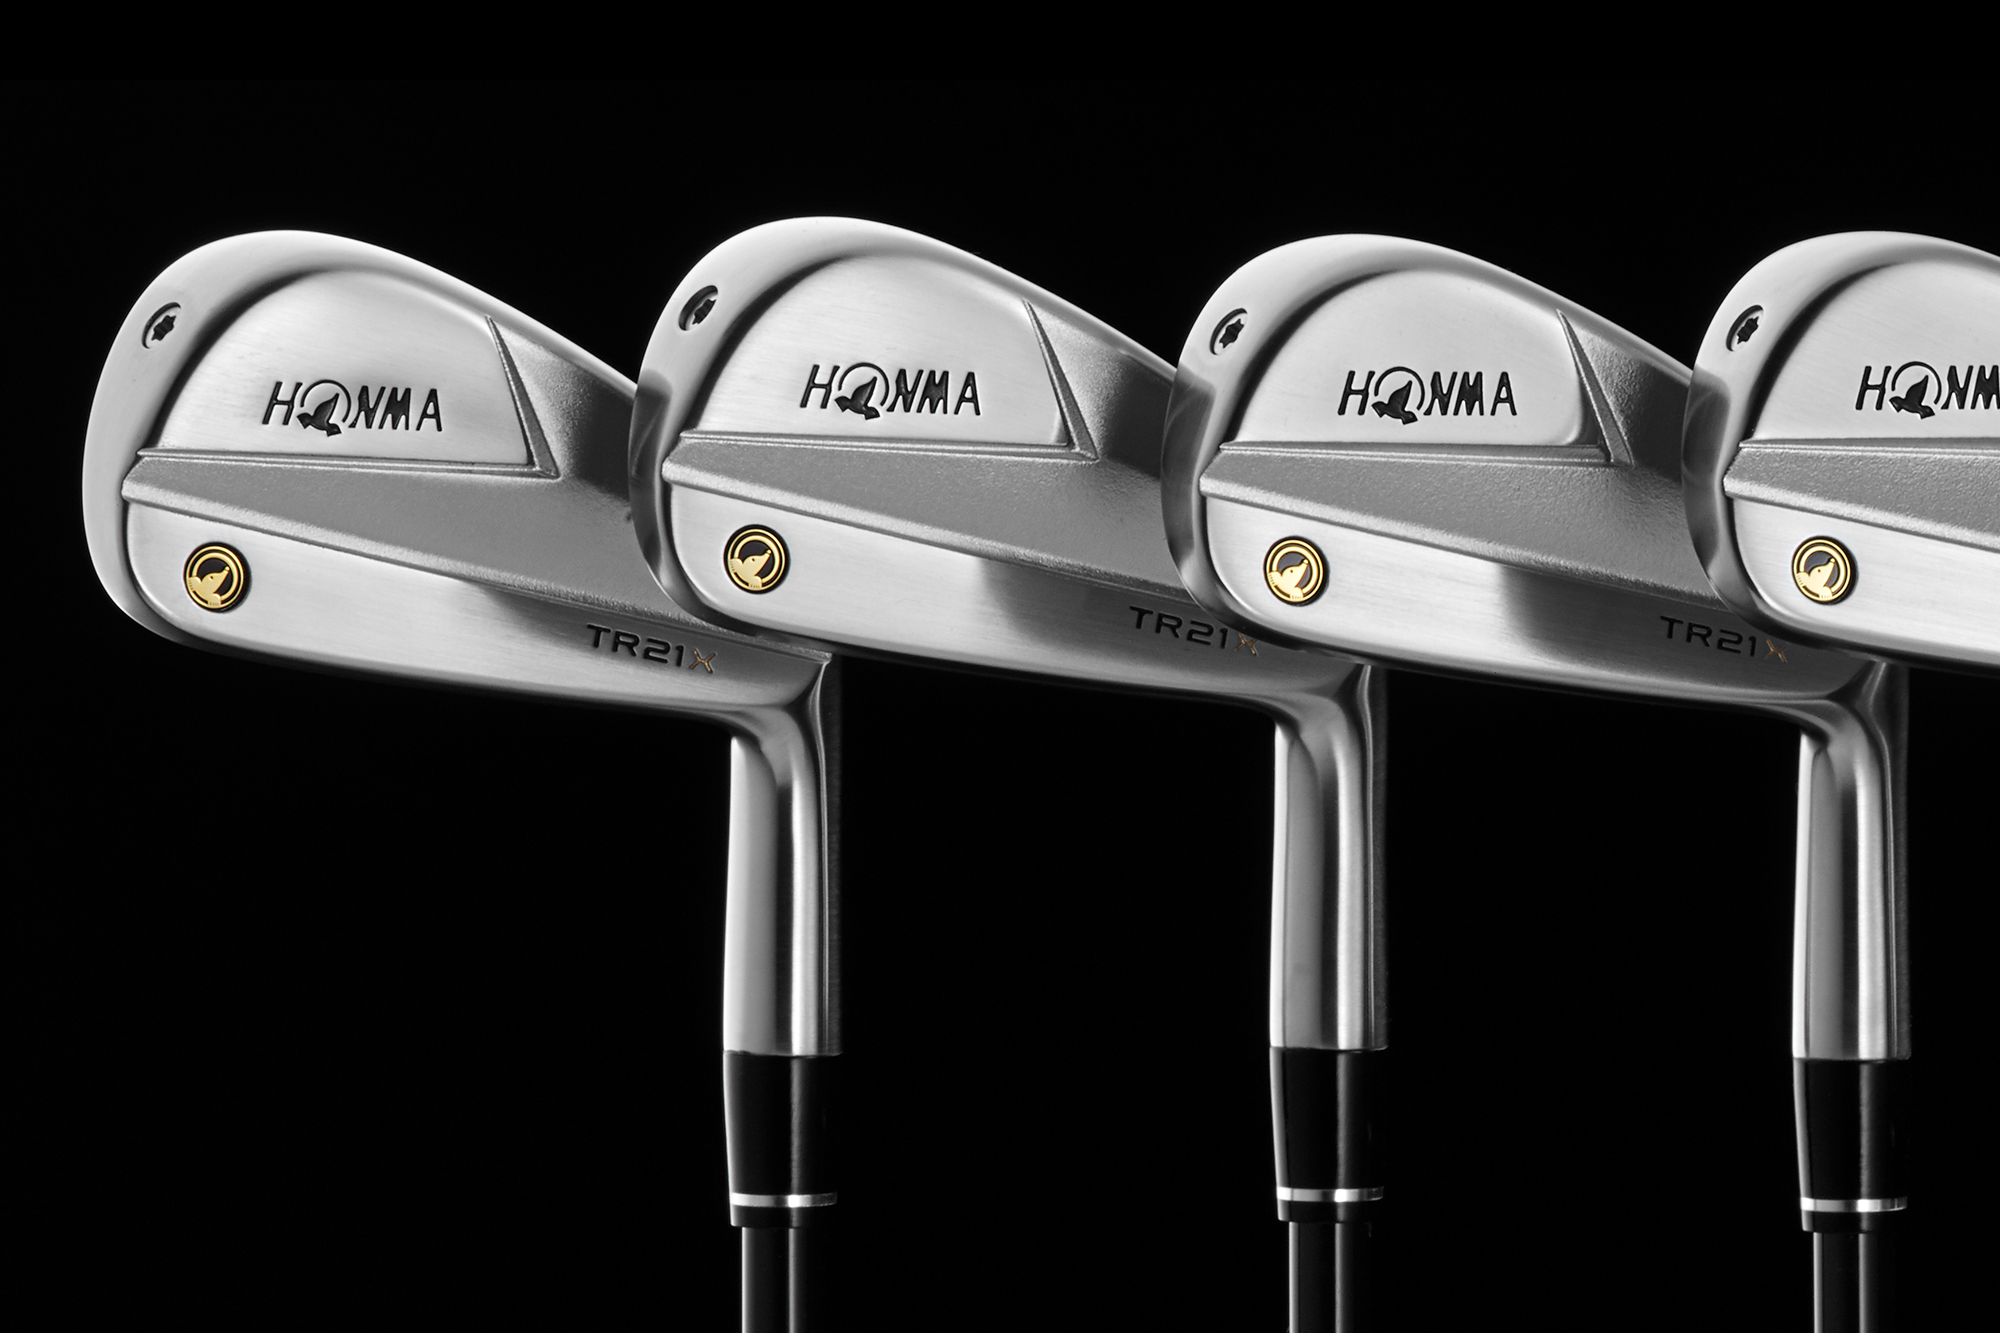 Honma TR21X irons review: Built for distance - but just how far do they go?